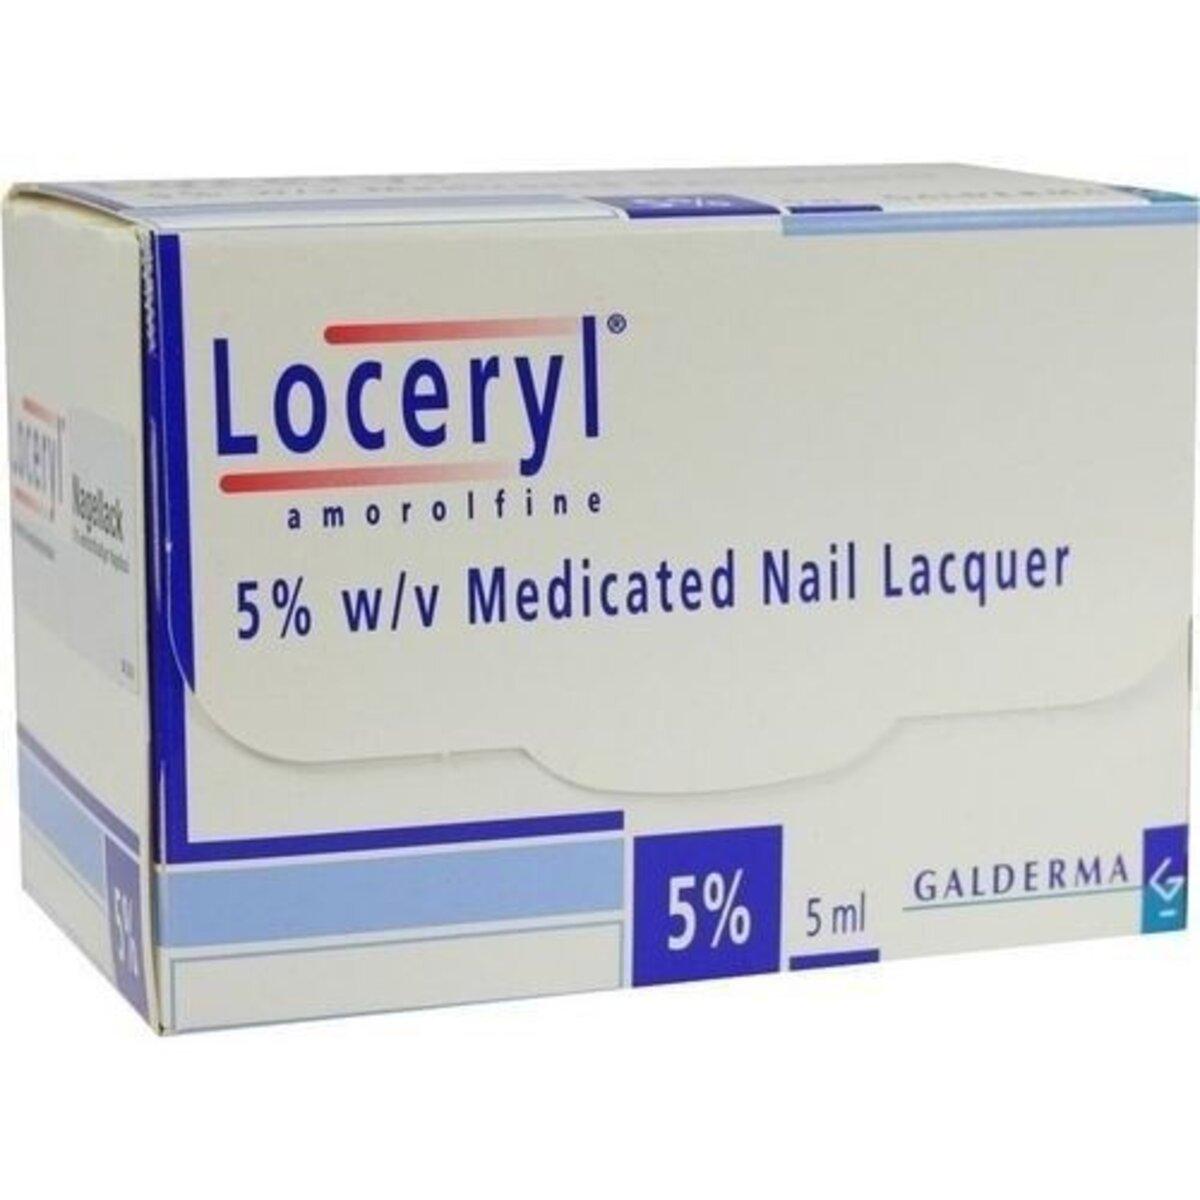 Amorolfine 5% Medicated Nail Fungal Lacquer 3ml | EasyMeds Pharmacy